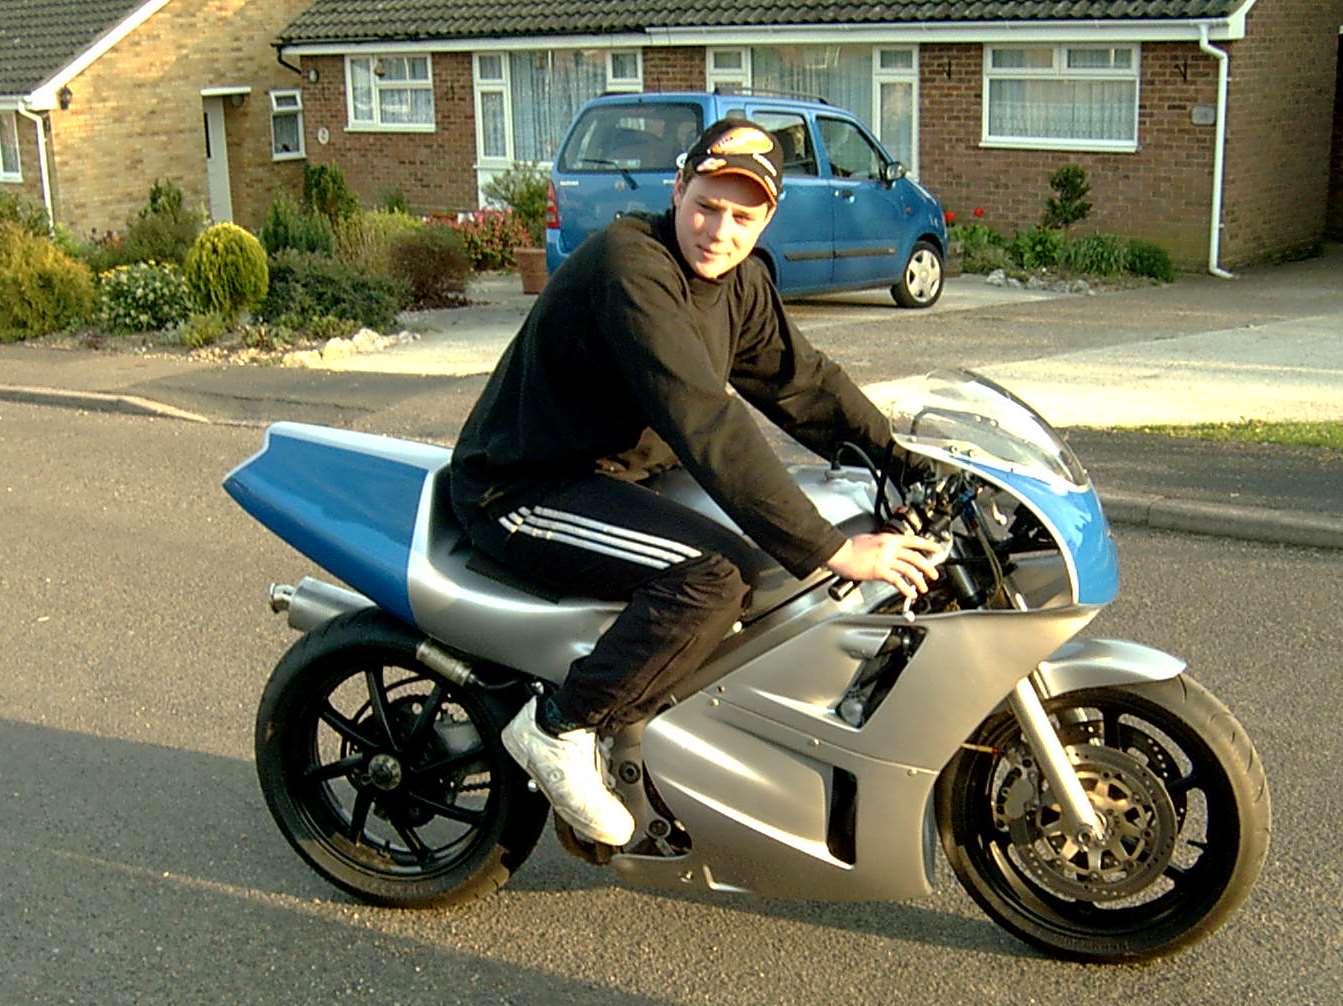 James Fennings, 18, was killed in a motorcycle racing accident